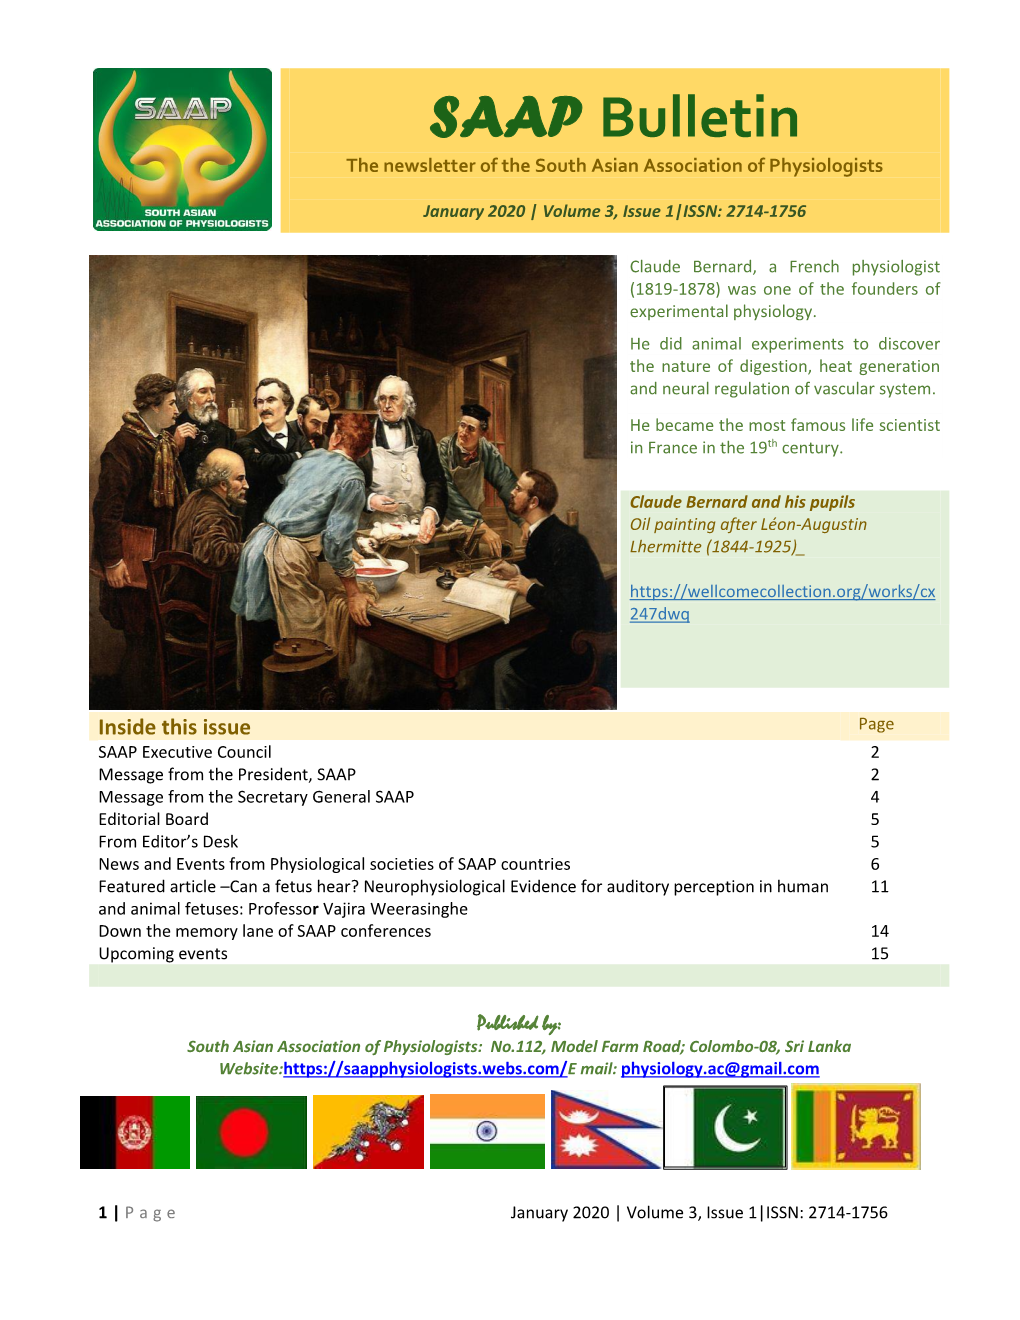 SAAP Bulletin the Newsletter of the South Asian Association of Physiologists